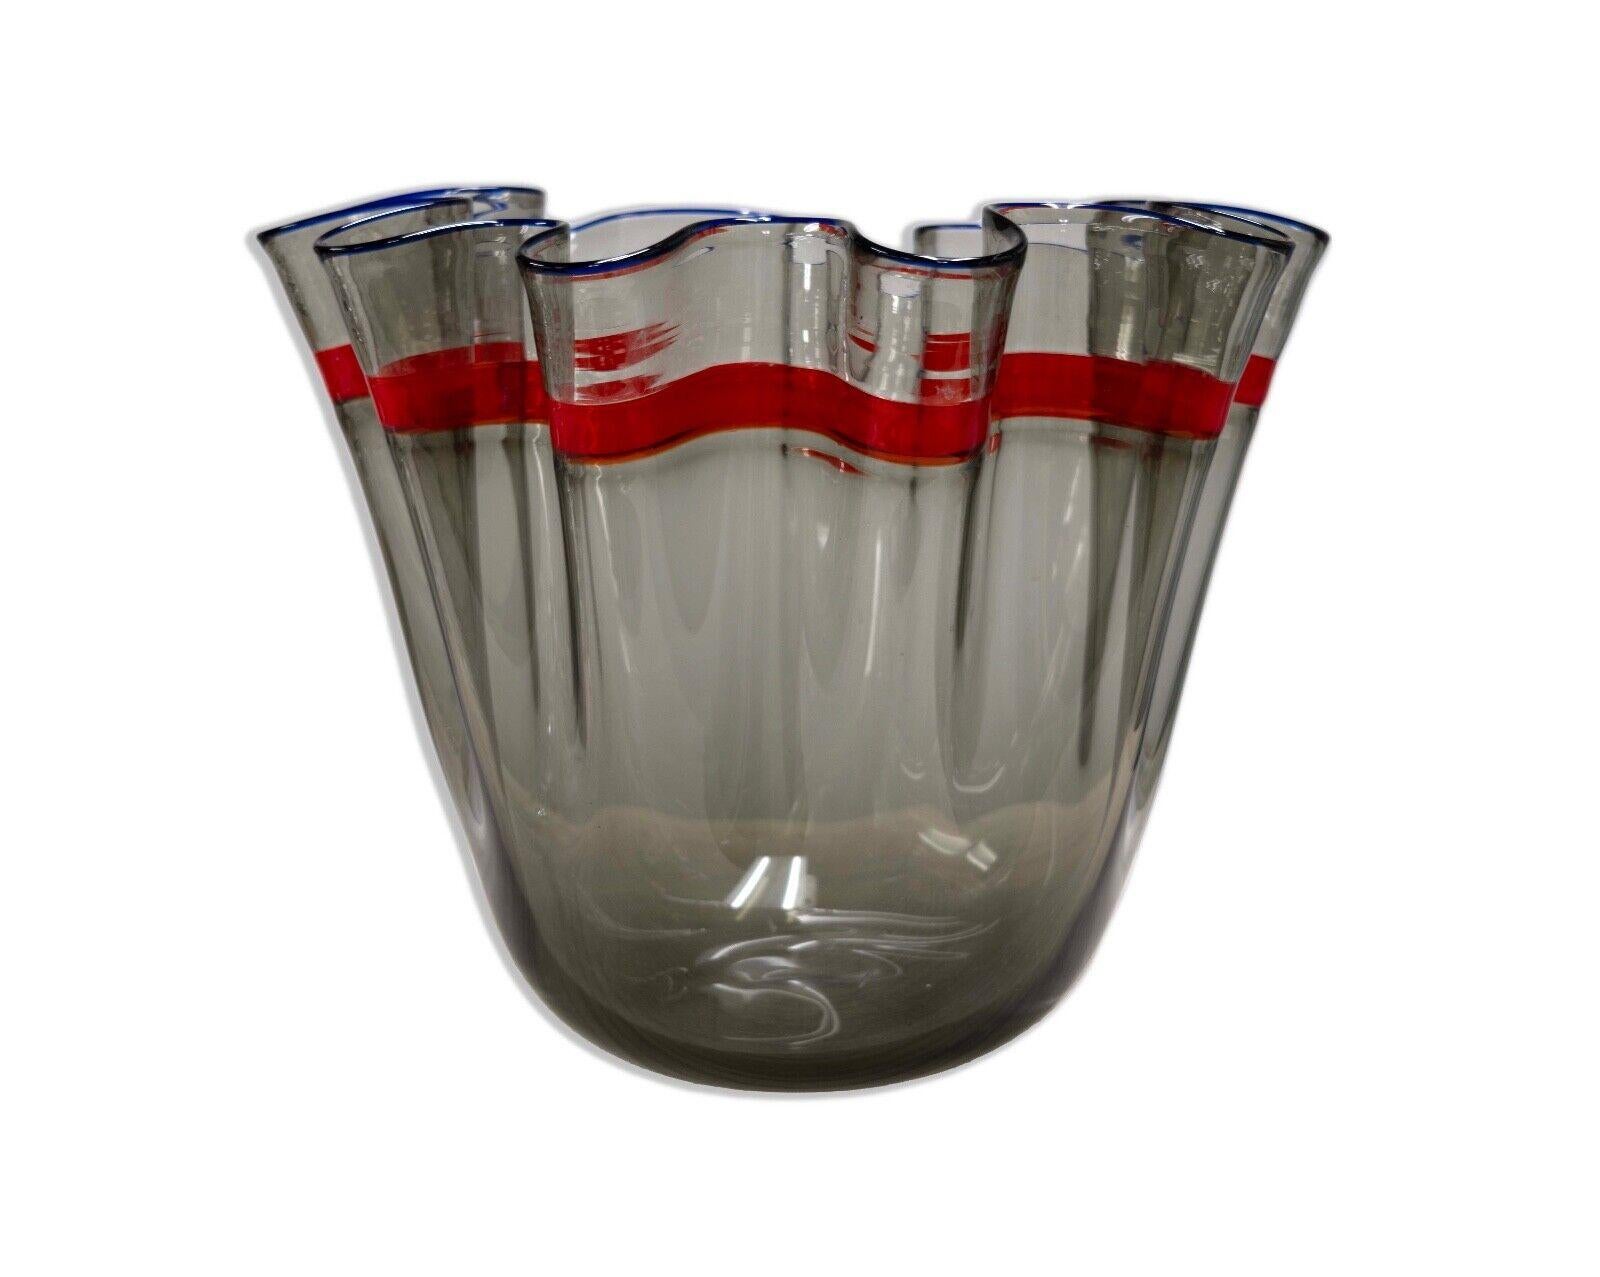 This striking Alvise handkerchief bowl, a masterpiece from the 1980s, features a unique fazzoletto design that mimics the elegant drape of a handkerchief. The vessel is crafted with a smoky translucent glass, adorned with a vivid red stripe that